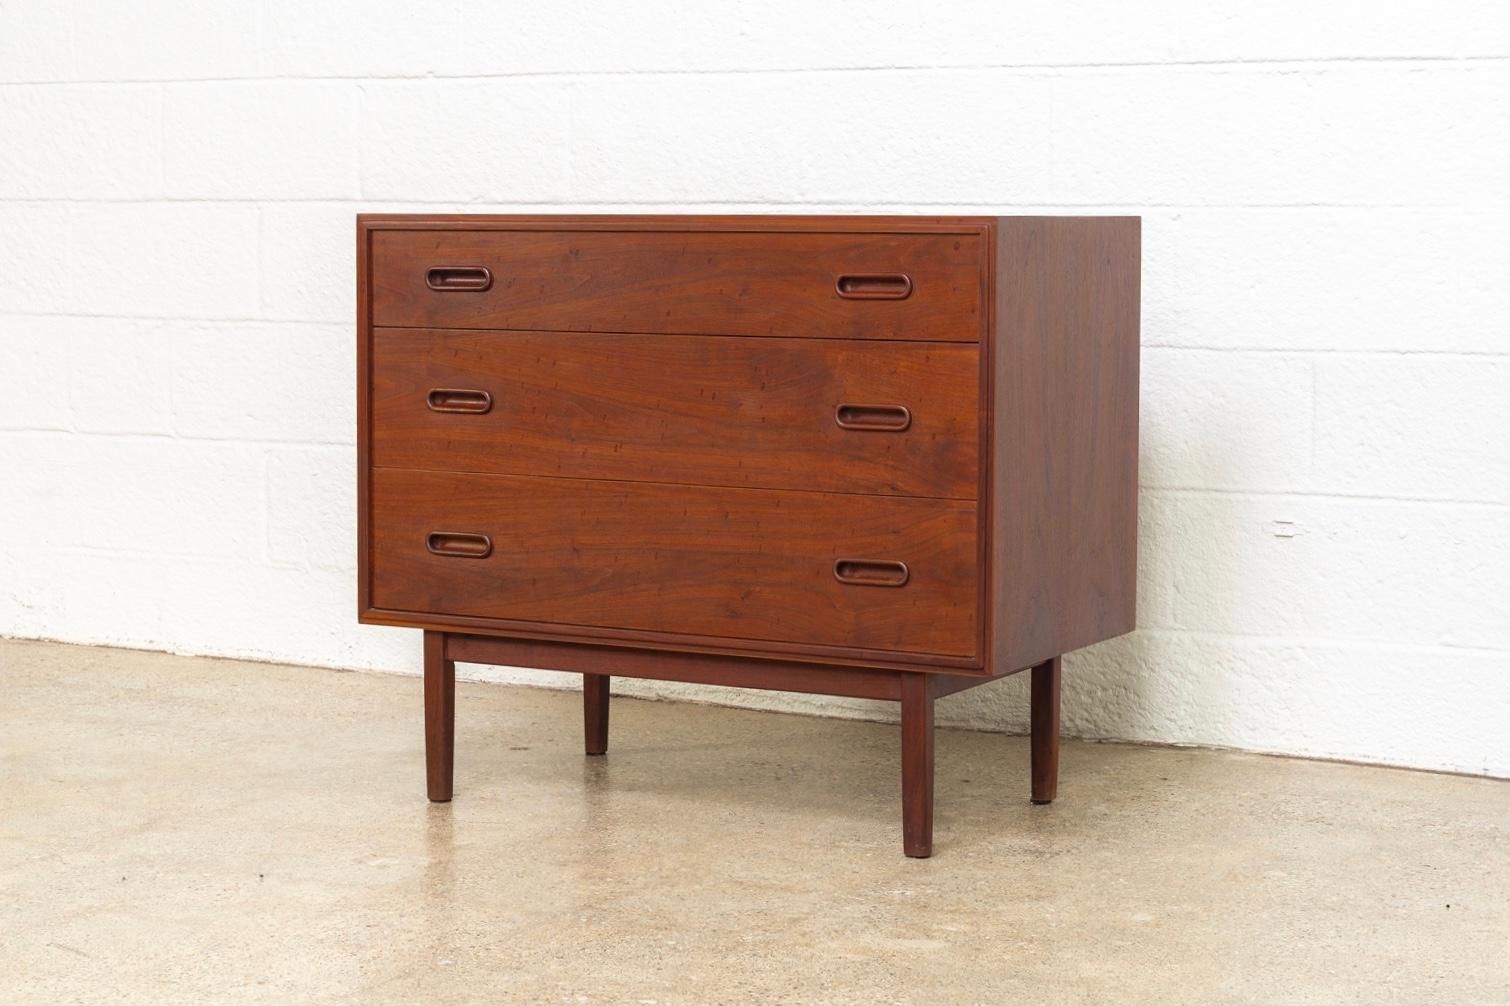 This vintage midcentury Danish modern three-drawer dresser in the manner of Arne Vodder is circa 1960. The Classic Danish modern design has elegant, Minimalist styling featuring distinctive sculptural drawer pulls and squared-off legs. It is